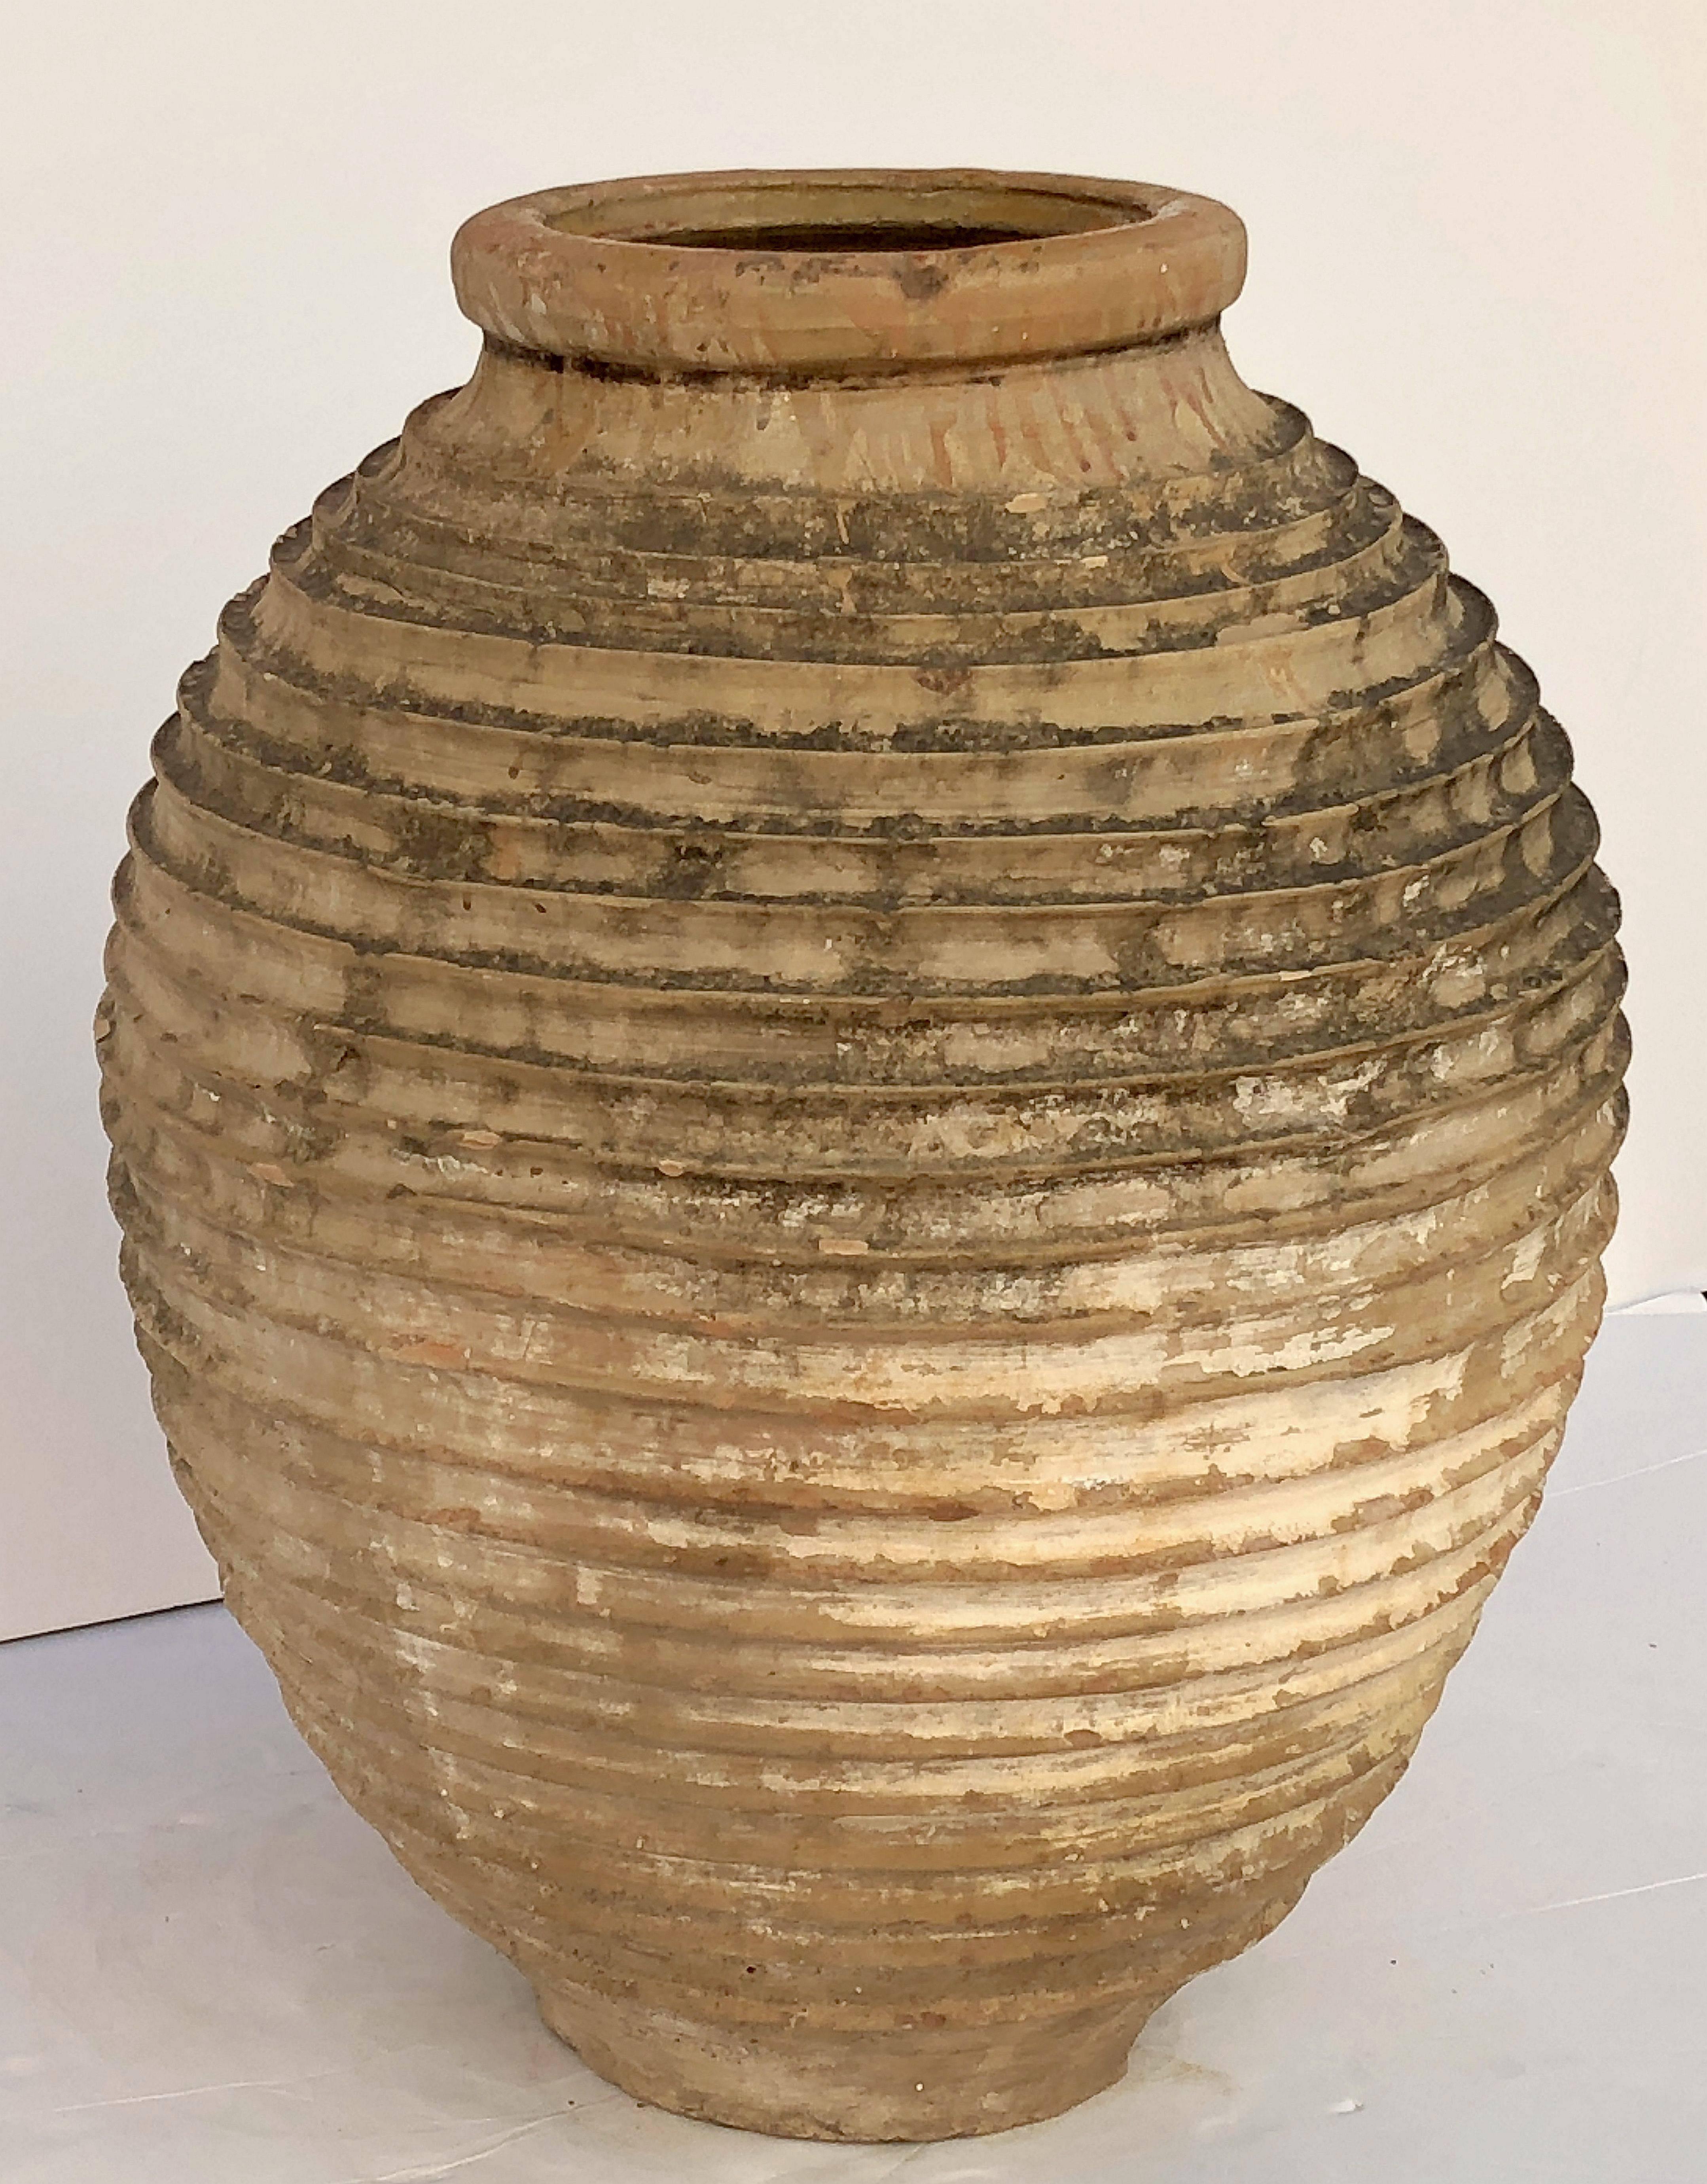 A handsome large Greek garden urn pot (Amphora) or oil jar, featuring a glazed top over a ridged, cylindrical body and functional as an indoor or outdoor garden ornament or planter.

Other similarly-styled jars and pots available.

This pot's